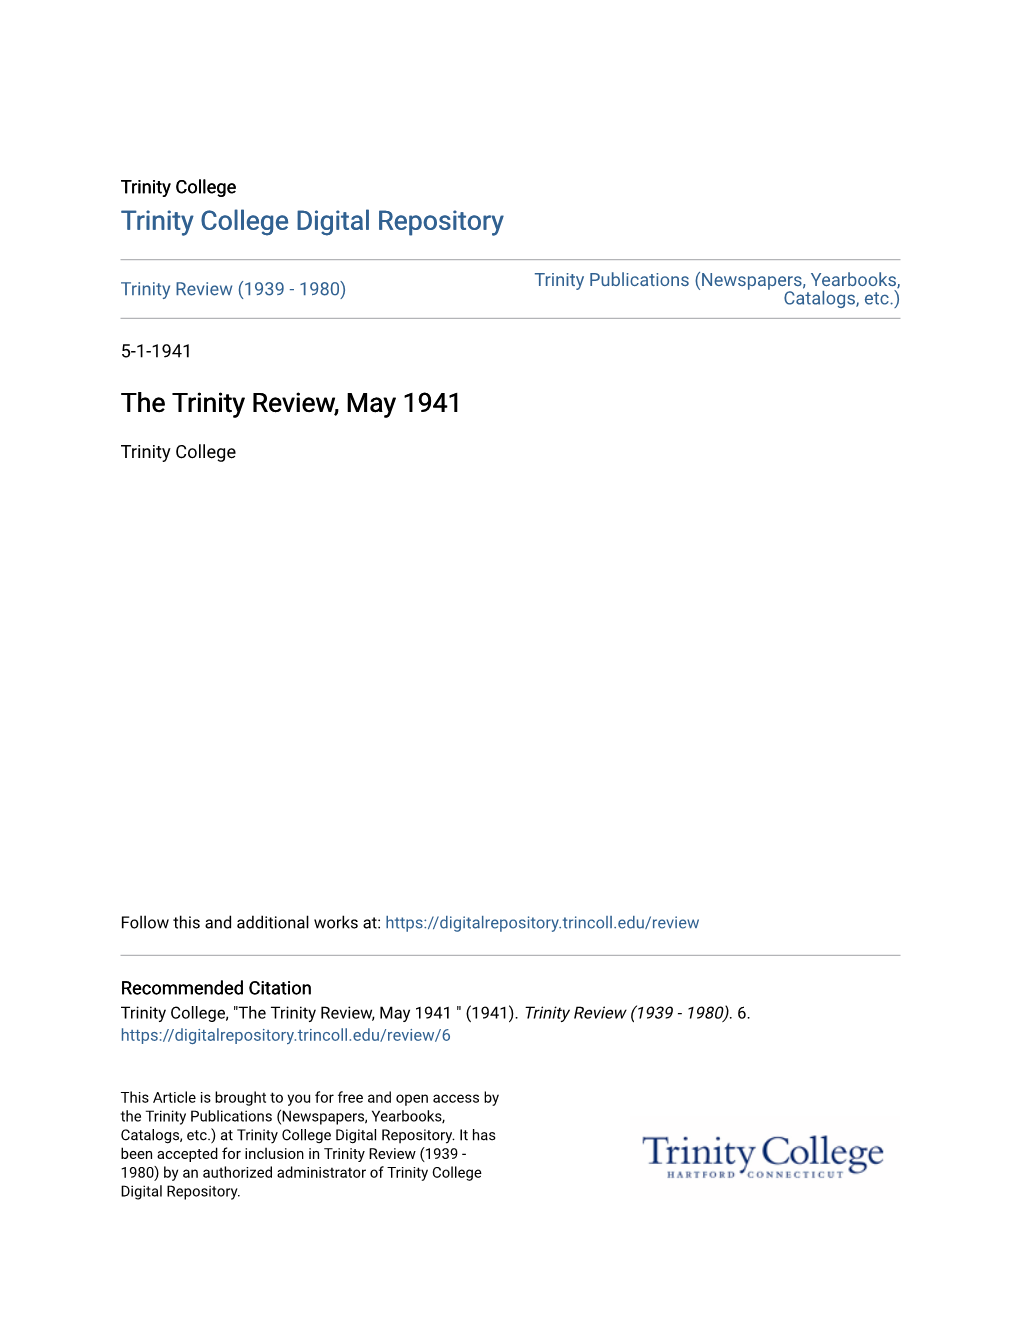 The Trinity Review, May 1941